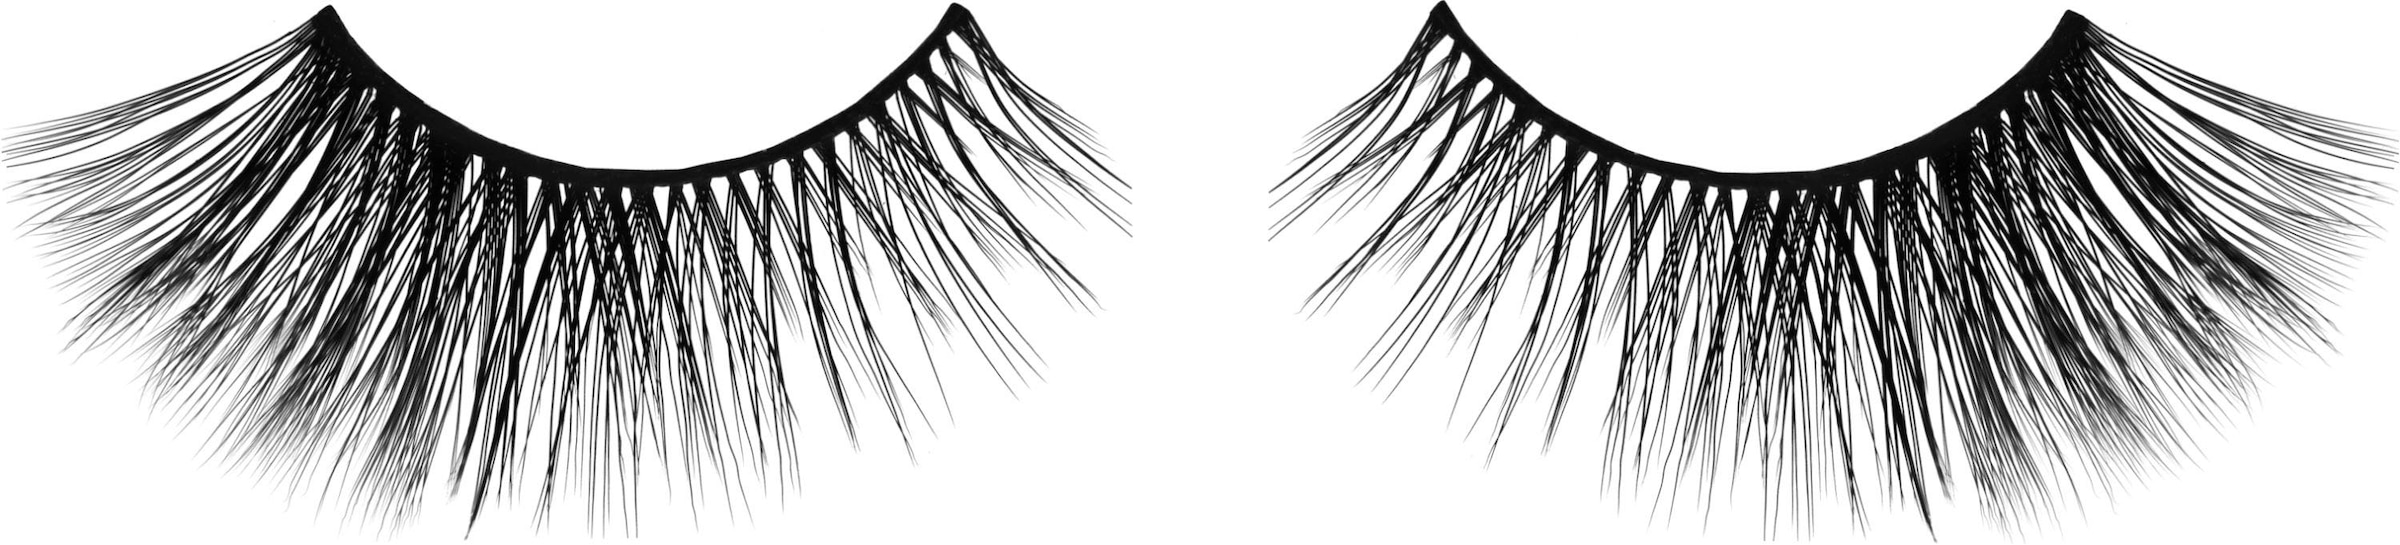 Catrice Bandwimpern »Faked 3D High Lift Lashes«, (Set, 3 tlg.) online bei  UNIVERSAL